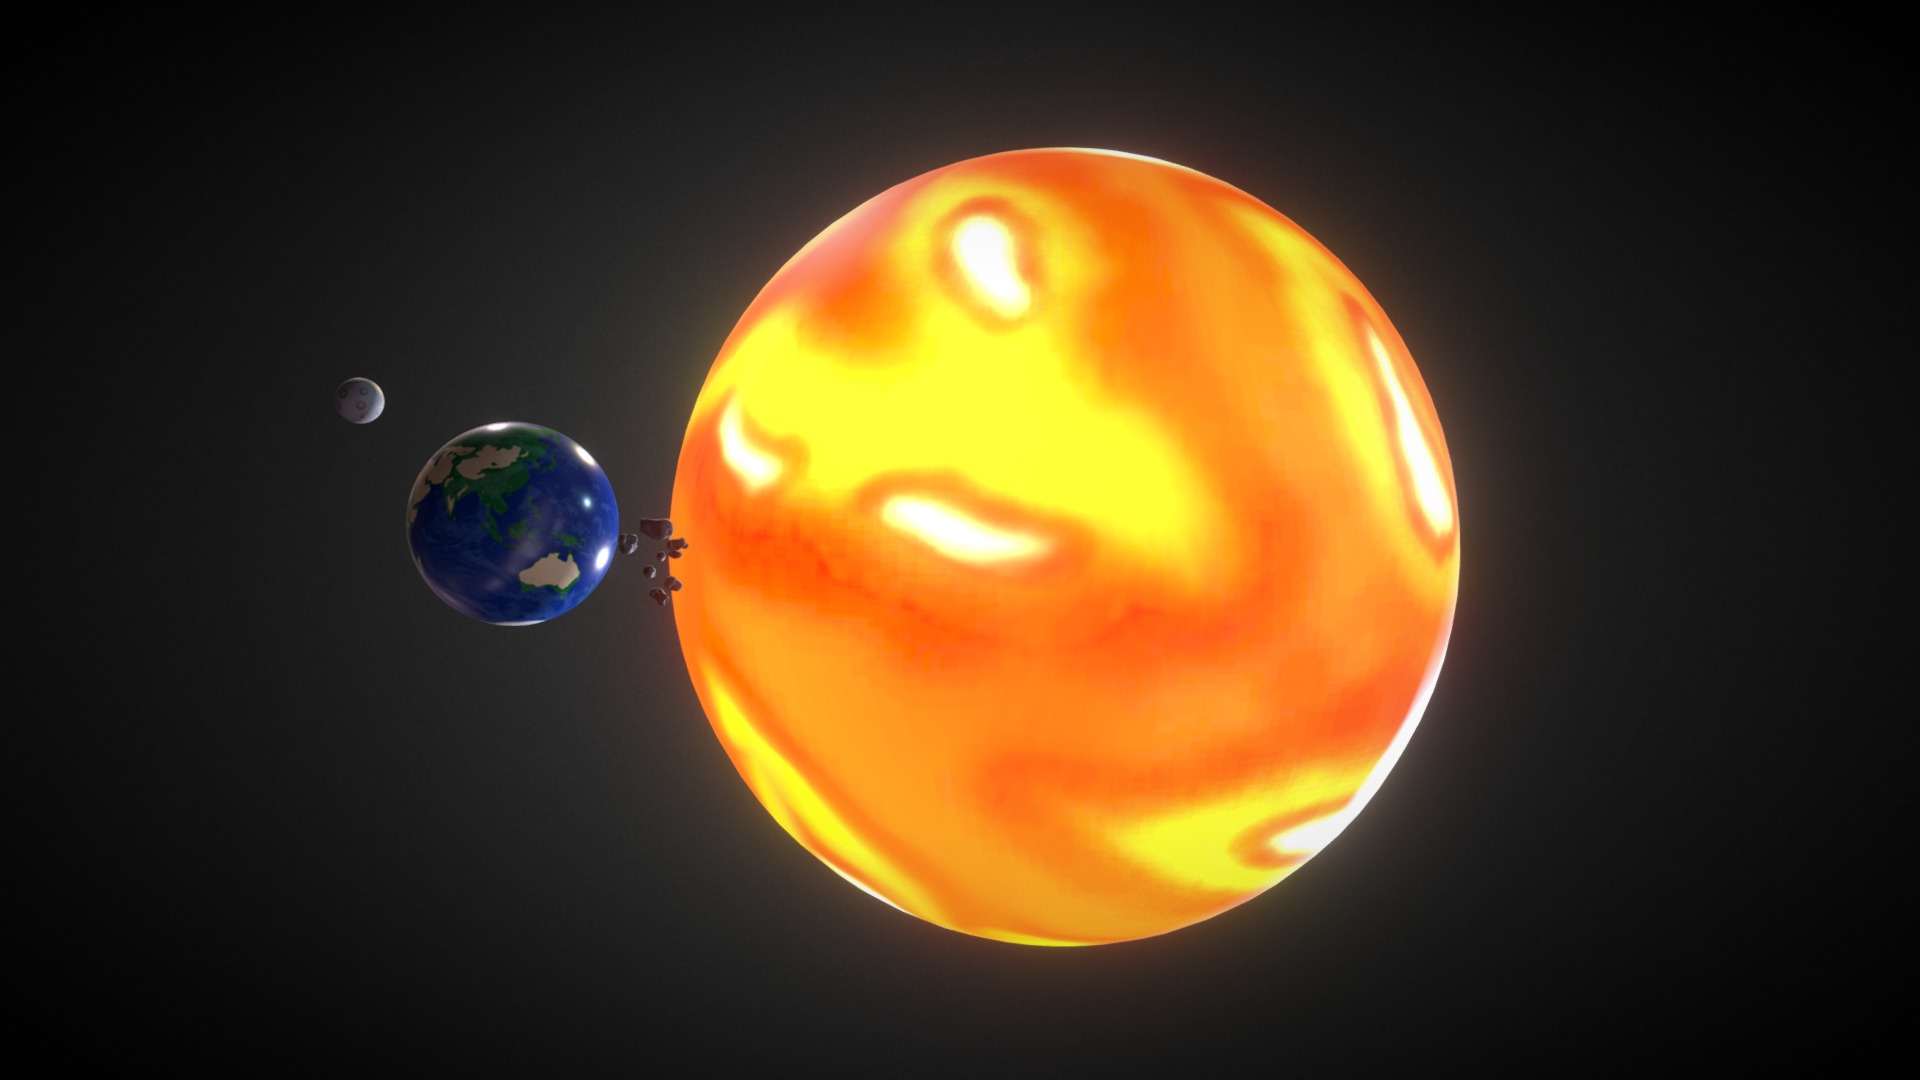 3D model Sun, Earth, Moon and Asteroid - This is a 3D model of the Sun, Earth, Moon and Asteroid. The 3D model is about a planet and a blue planet.